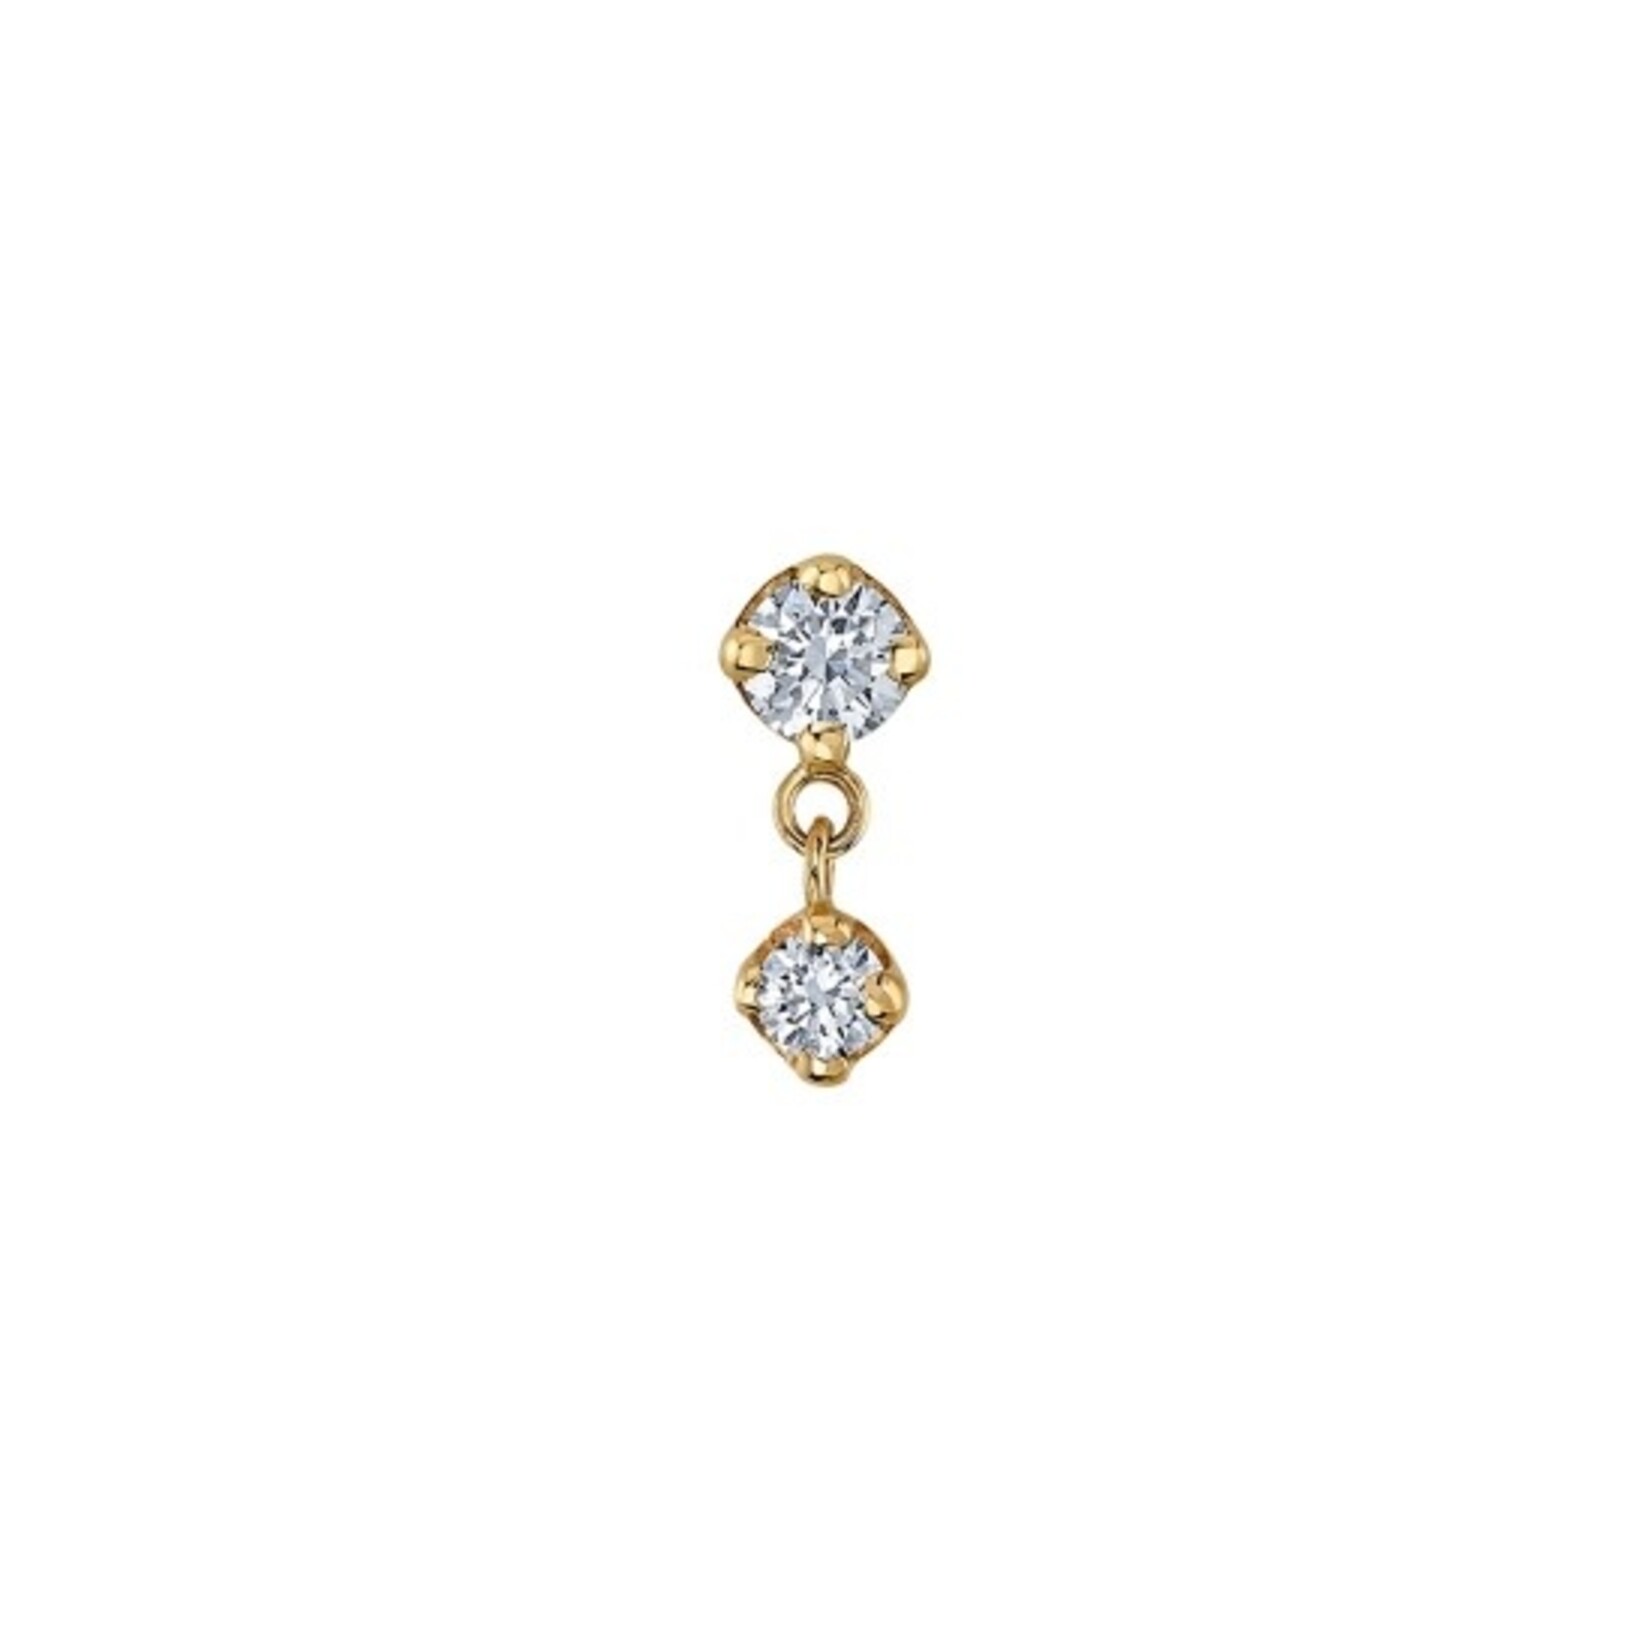 BVLA BVLA "Duet" threaded end with 2.0 and 1.5 CZ dangle